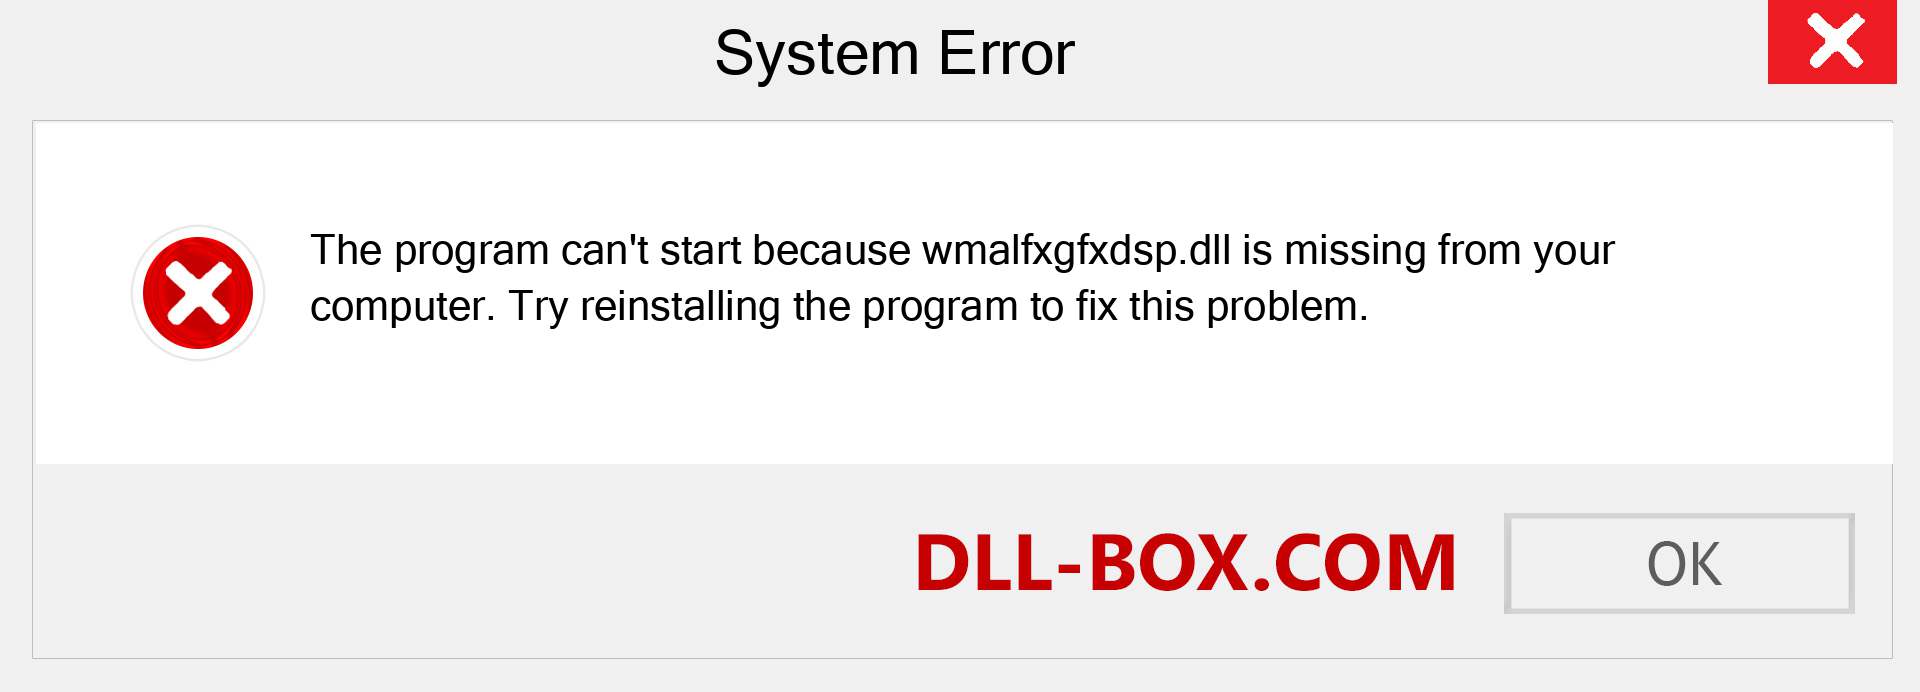  wmalfxgfxdsp.dll file is missing?. Download for Windows 7, 8, 10 - Fix  wmalfxgfxdsp dll Missing Error on Windows, photos, images